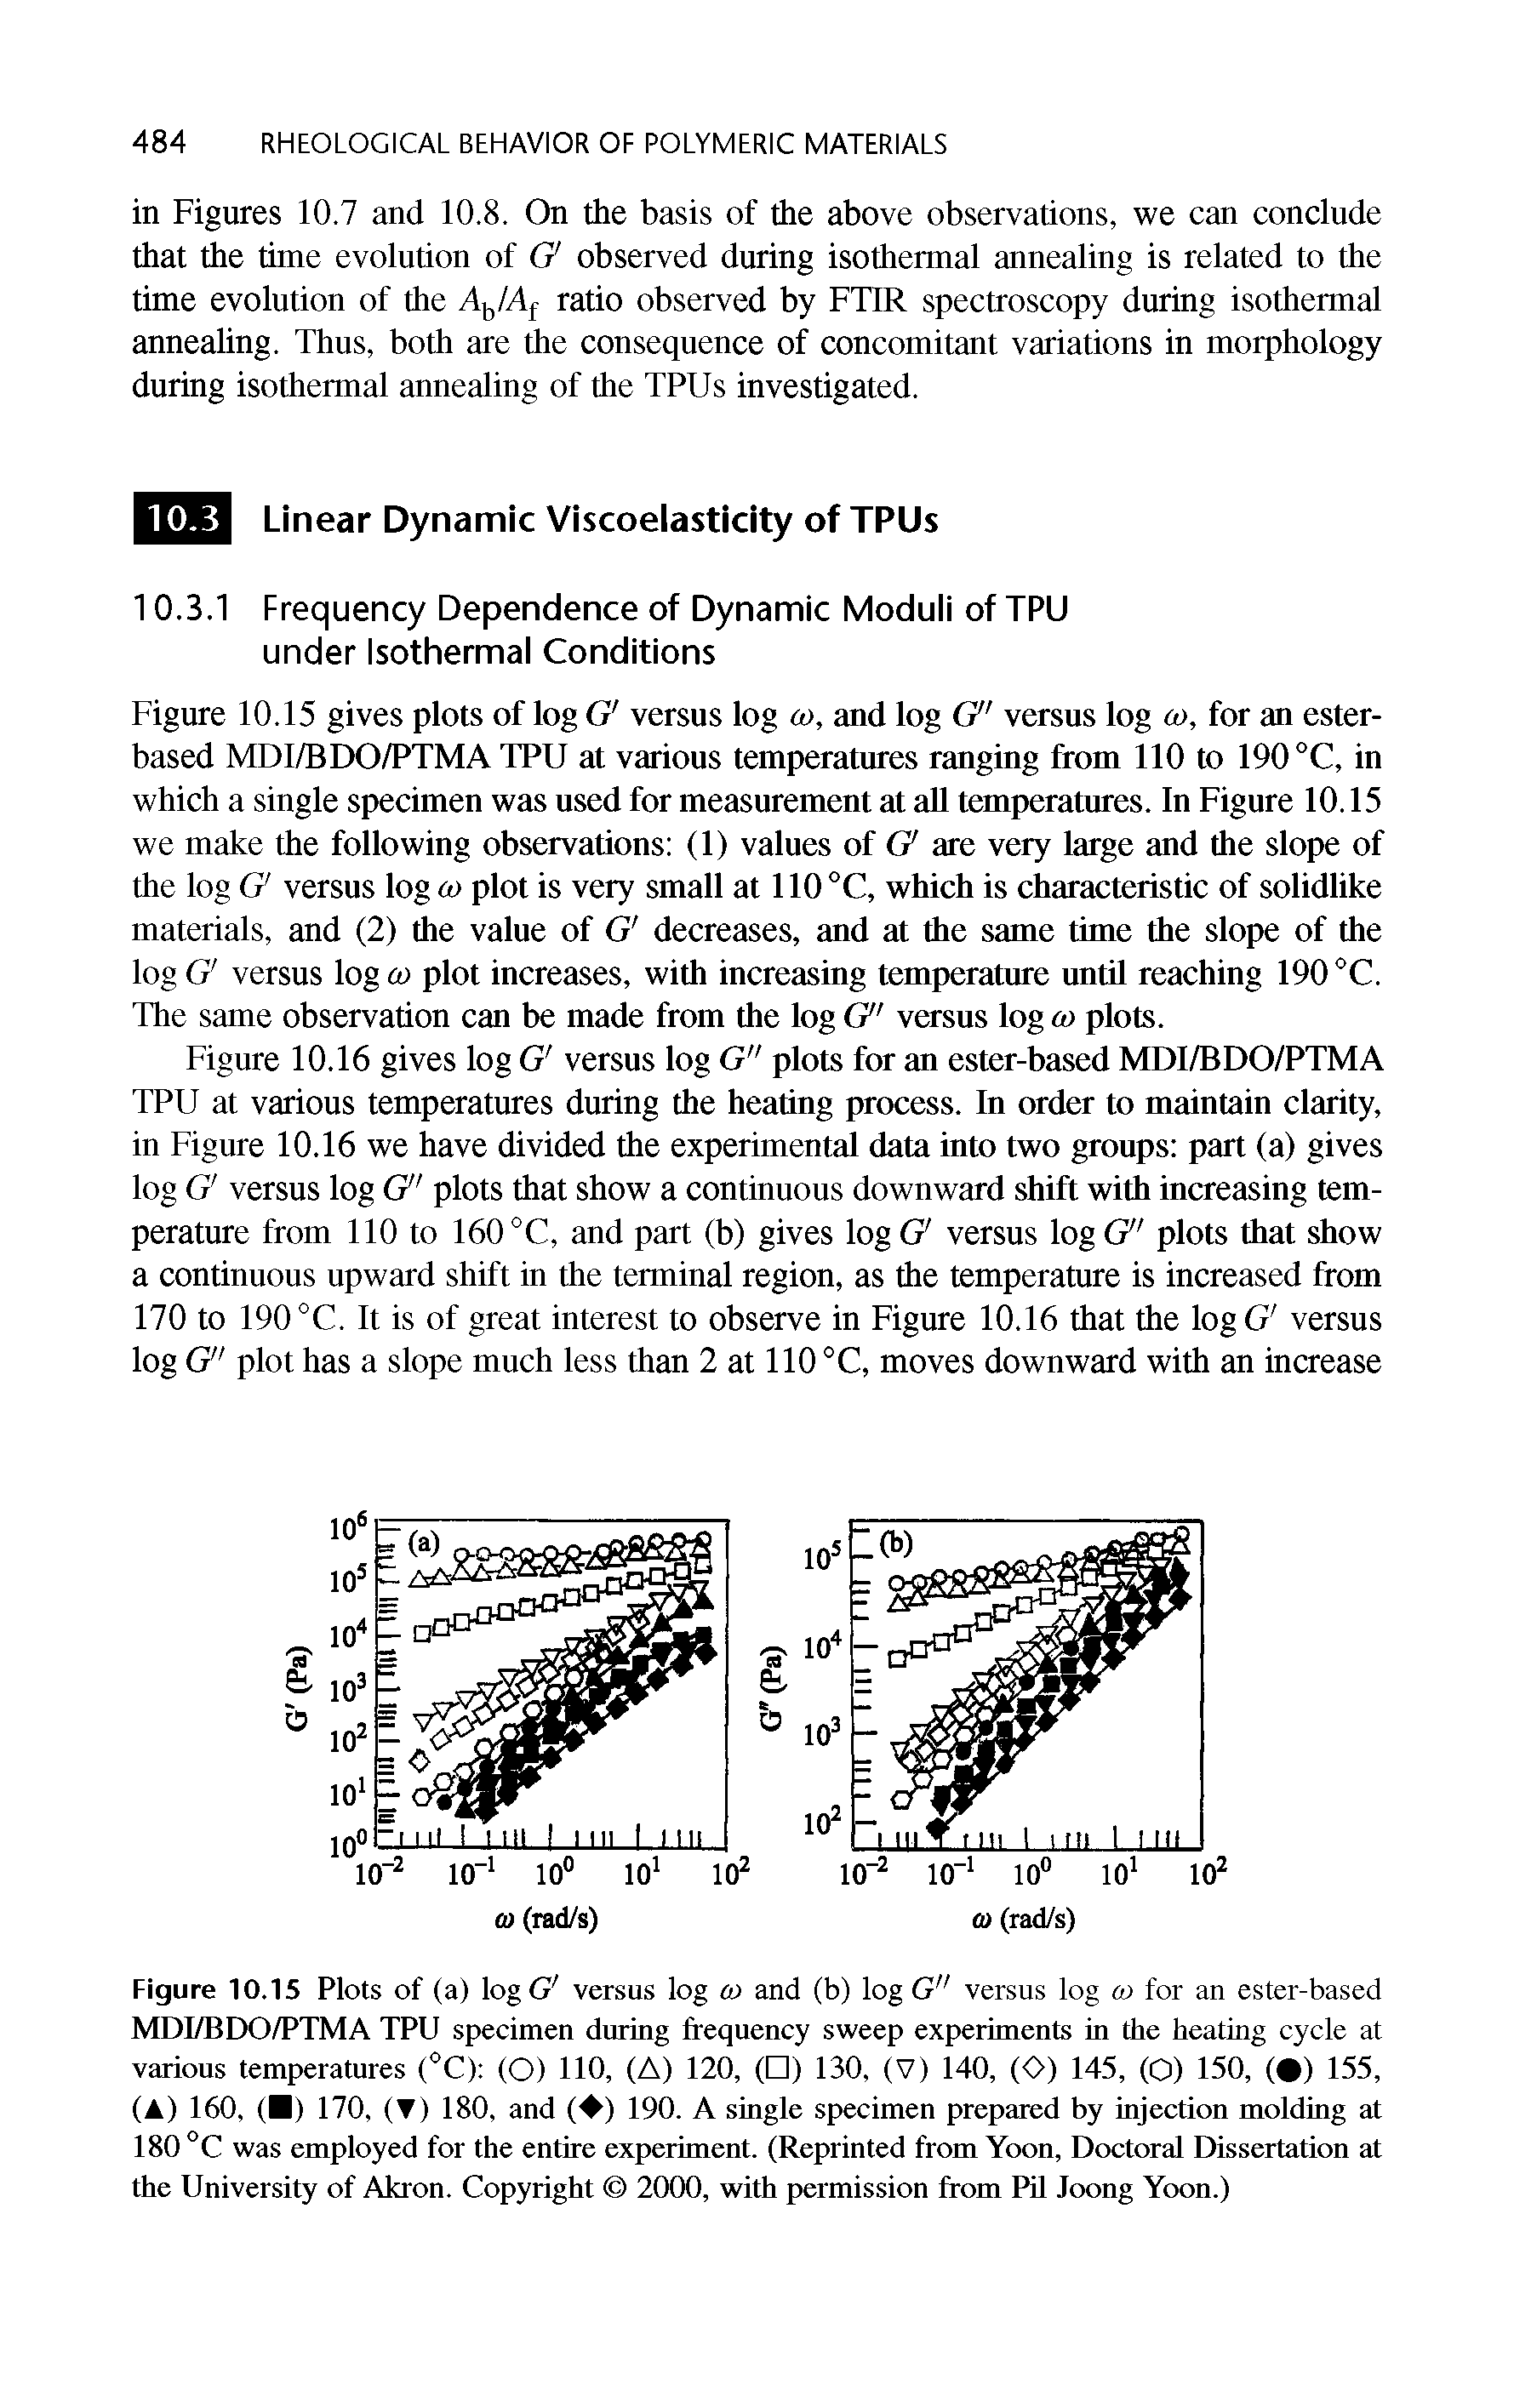 Figure 10.15 Plots of (a) logG versus log co and (b) log G" versus log co for an ester-based MDI/BDO/PTMA TPU specimen during frequency sweep experiments in the heating cycle at various temperatures CC) (O) 110, (A) 120, ( ) 130, (V) 140, (O) 145, (O) 150, ( ) 155, (A) 160, ( ) 170, (T) 180, and ( ) 190. A single specimen prepared by injection molding at 180 °C was employed for the entire experiment. (Reprinted from Yoon, Doctoral Dissertation at the University of Akron. Copyright 2000, with permission from PU Joong Yoon.)...